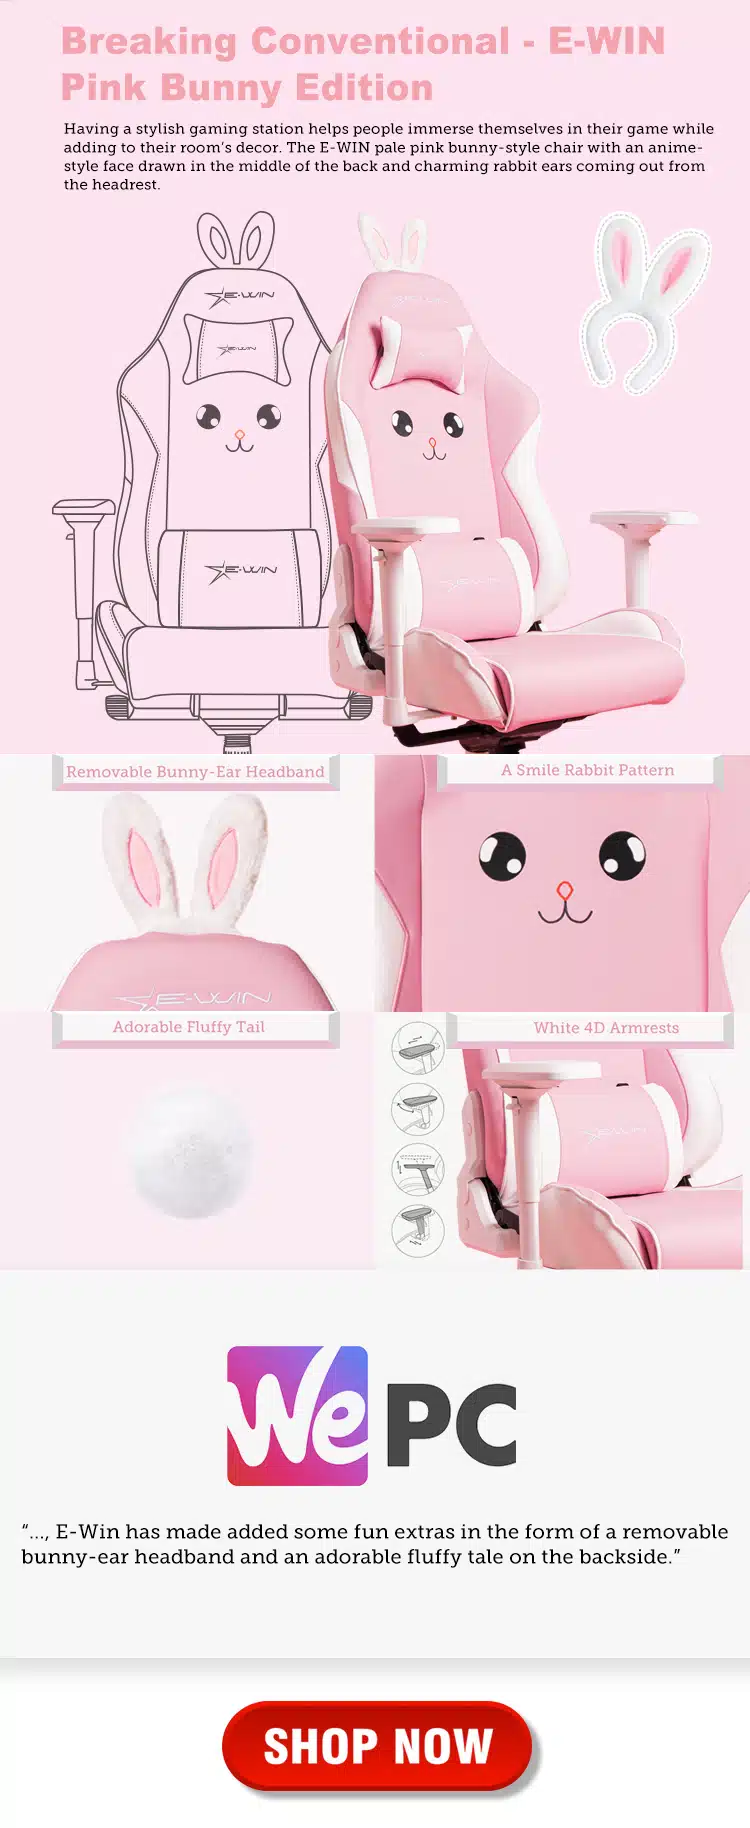 E-WIN Champion Series Pink Bunny Gaming Chair